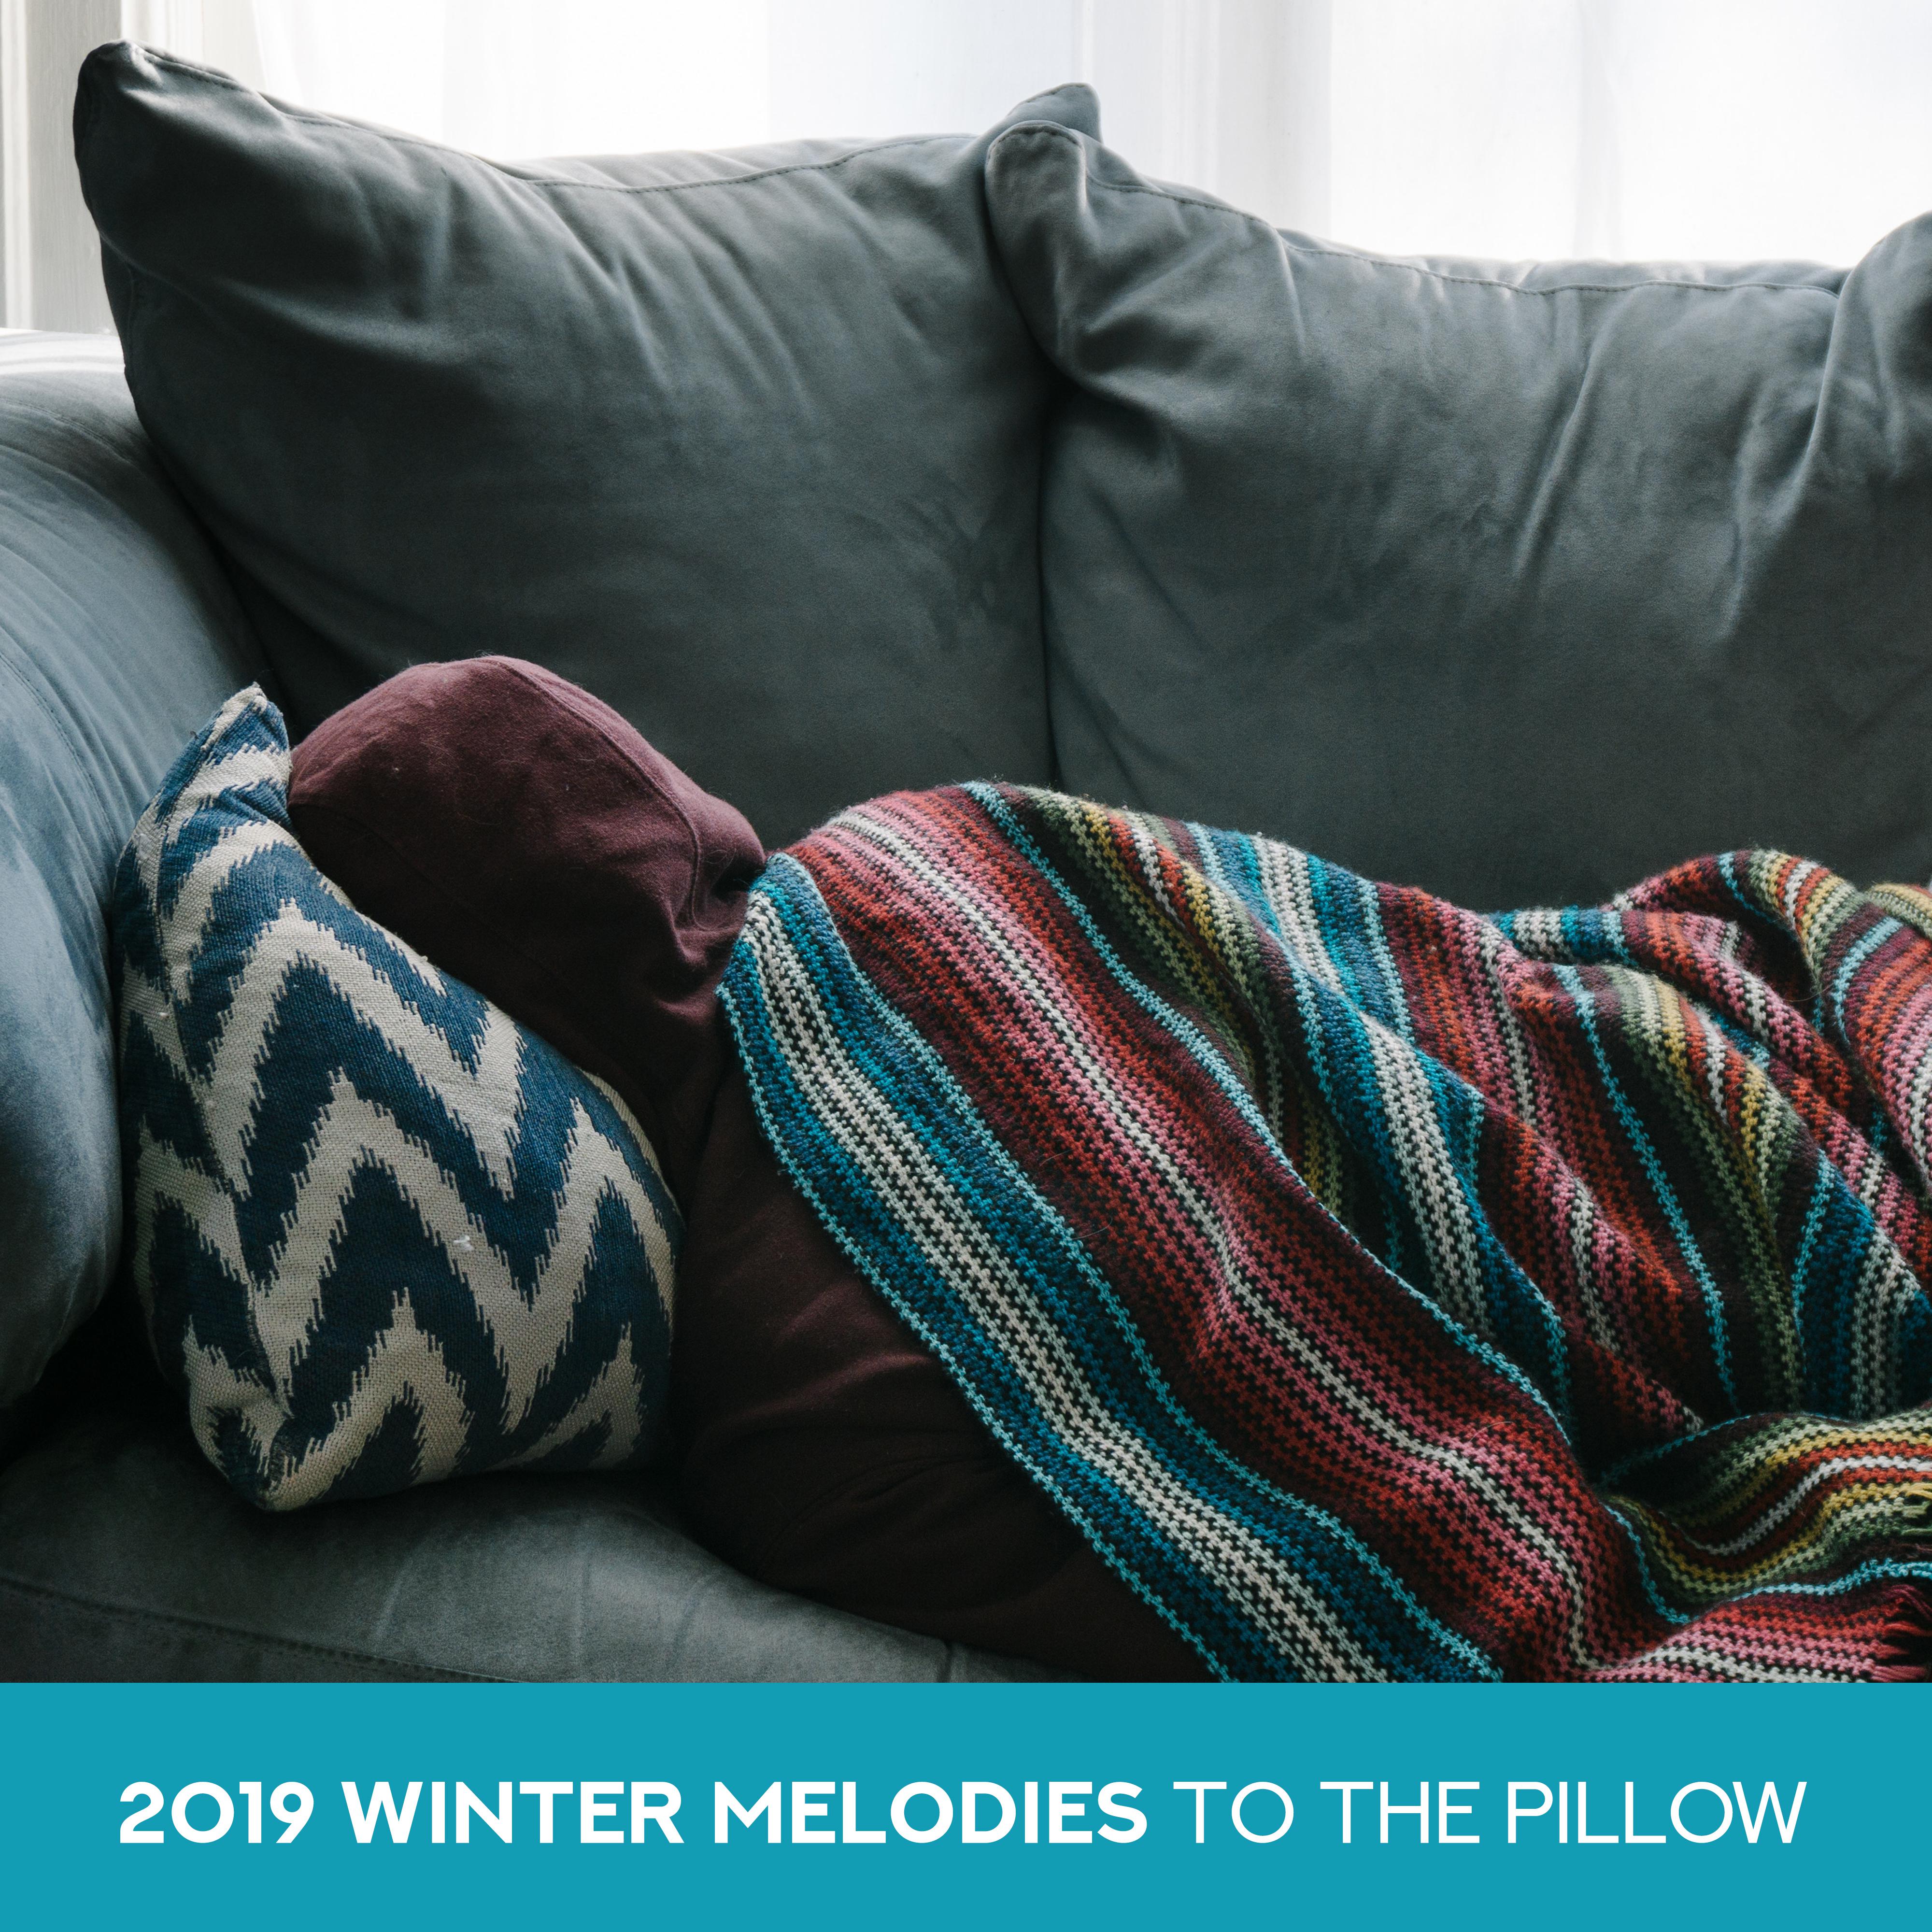 2019 Winter Melodies to the Pillow: 15 New Age Tracks for Good Sleep & Sleep Well